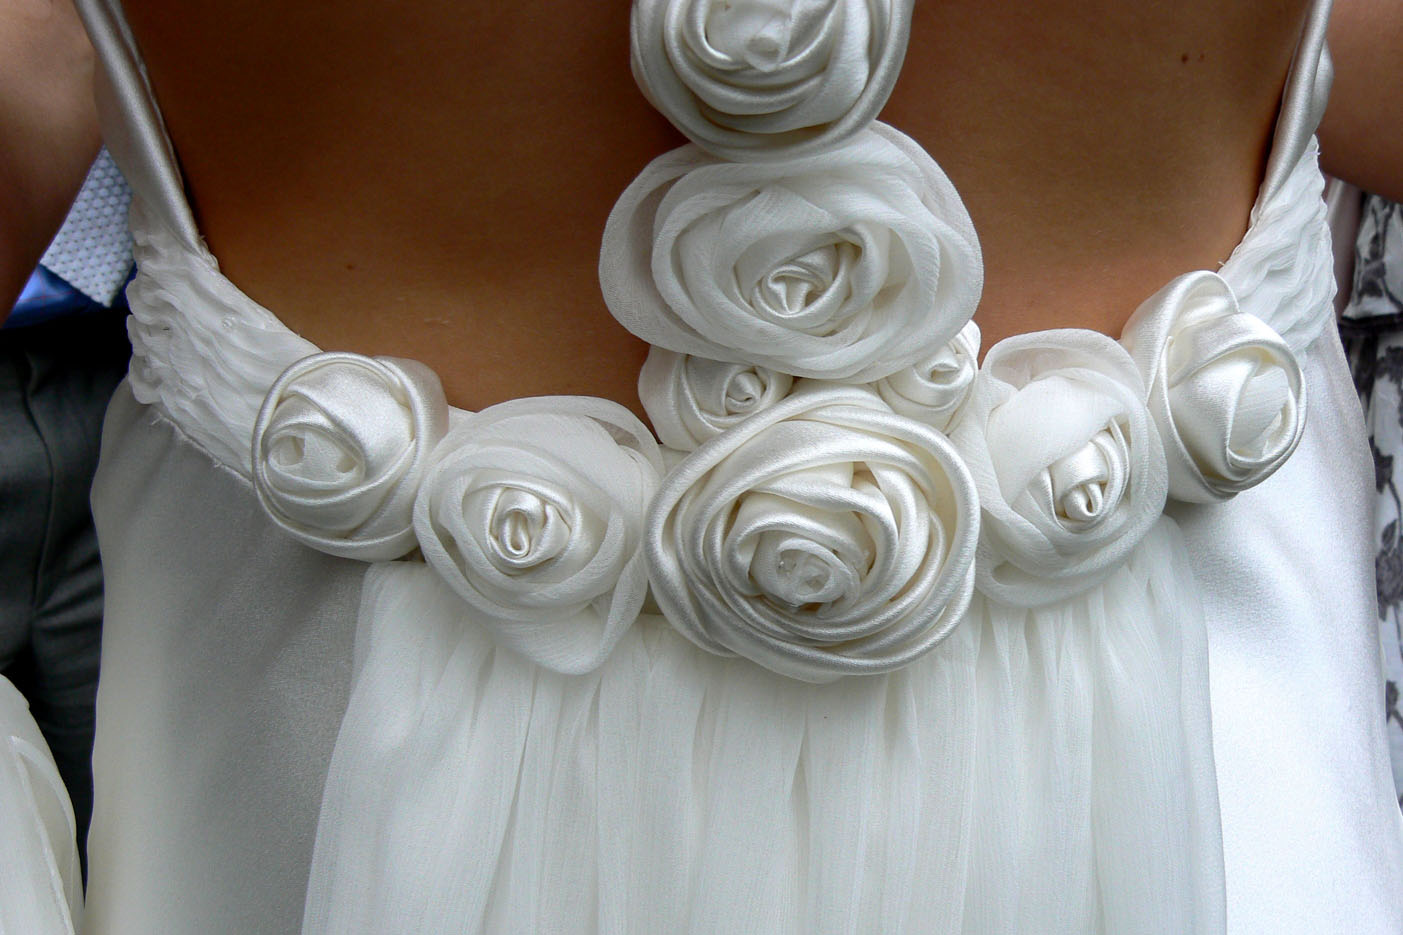 Detail from a bias cut wedding dress trimmed with silk satin and chiffon Dior roses